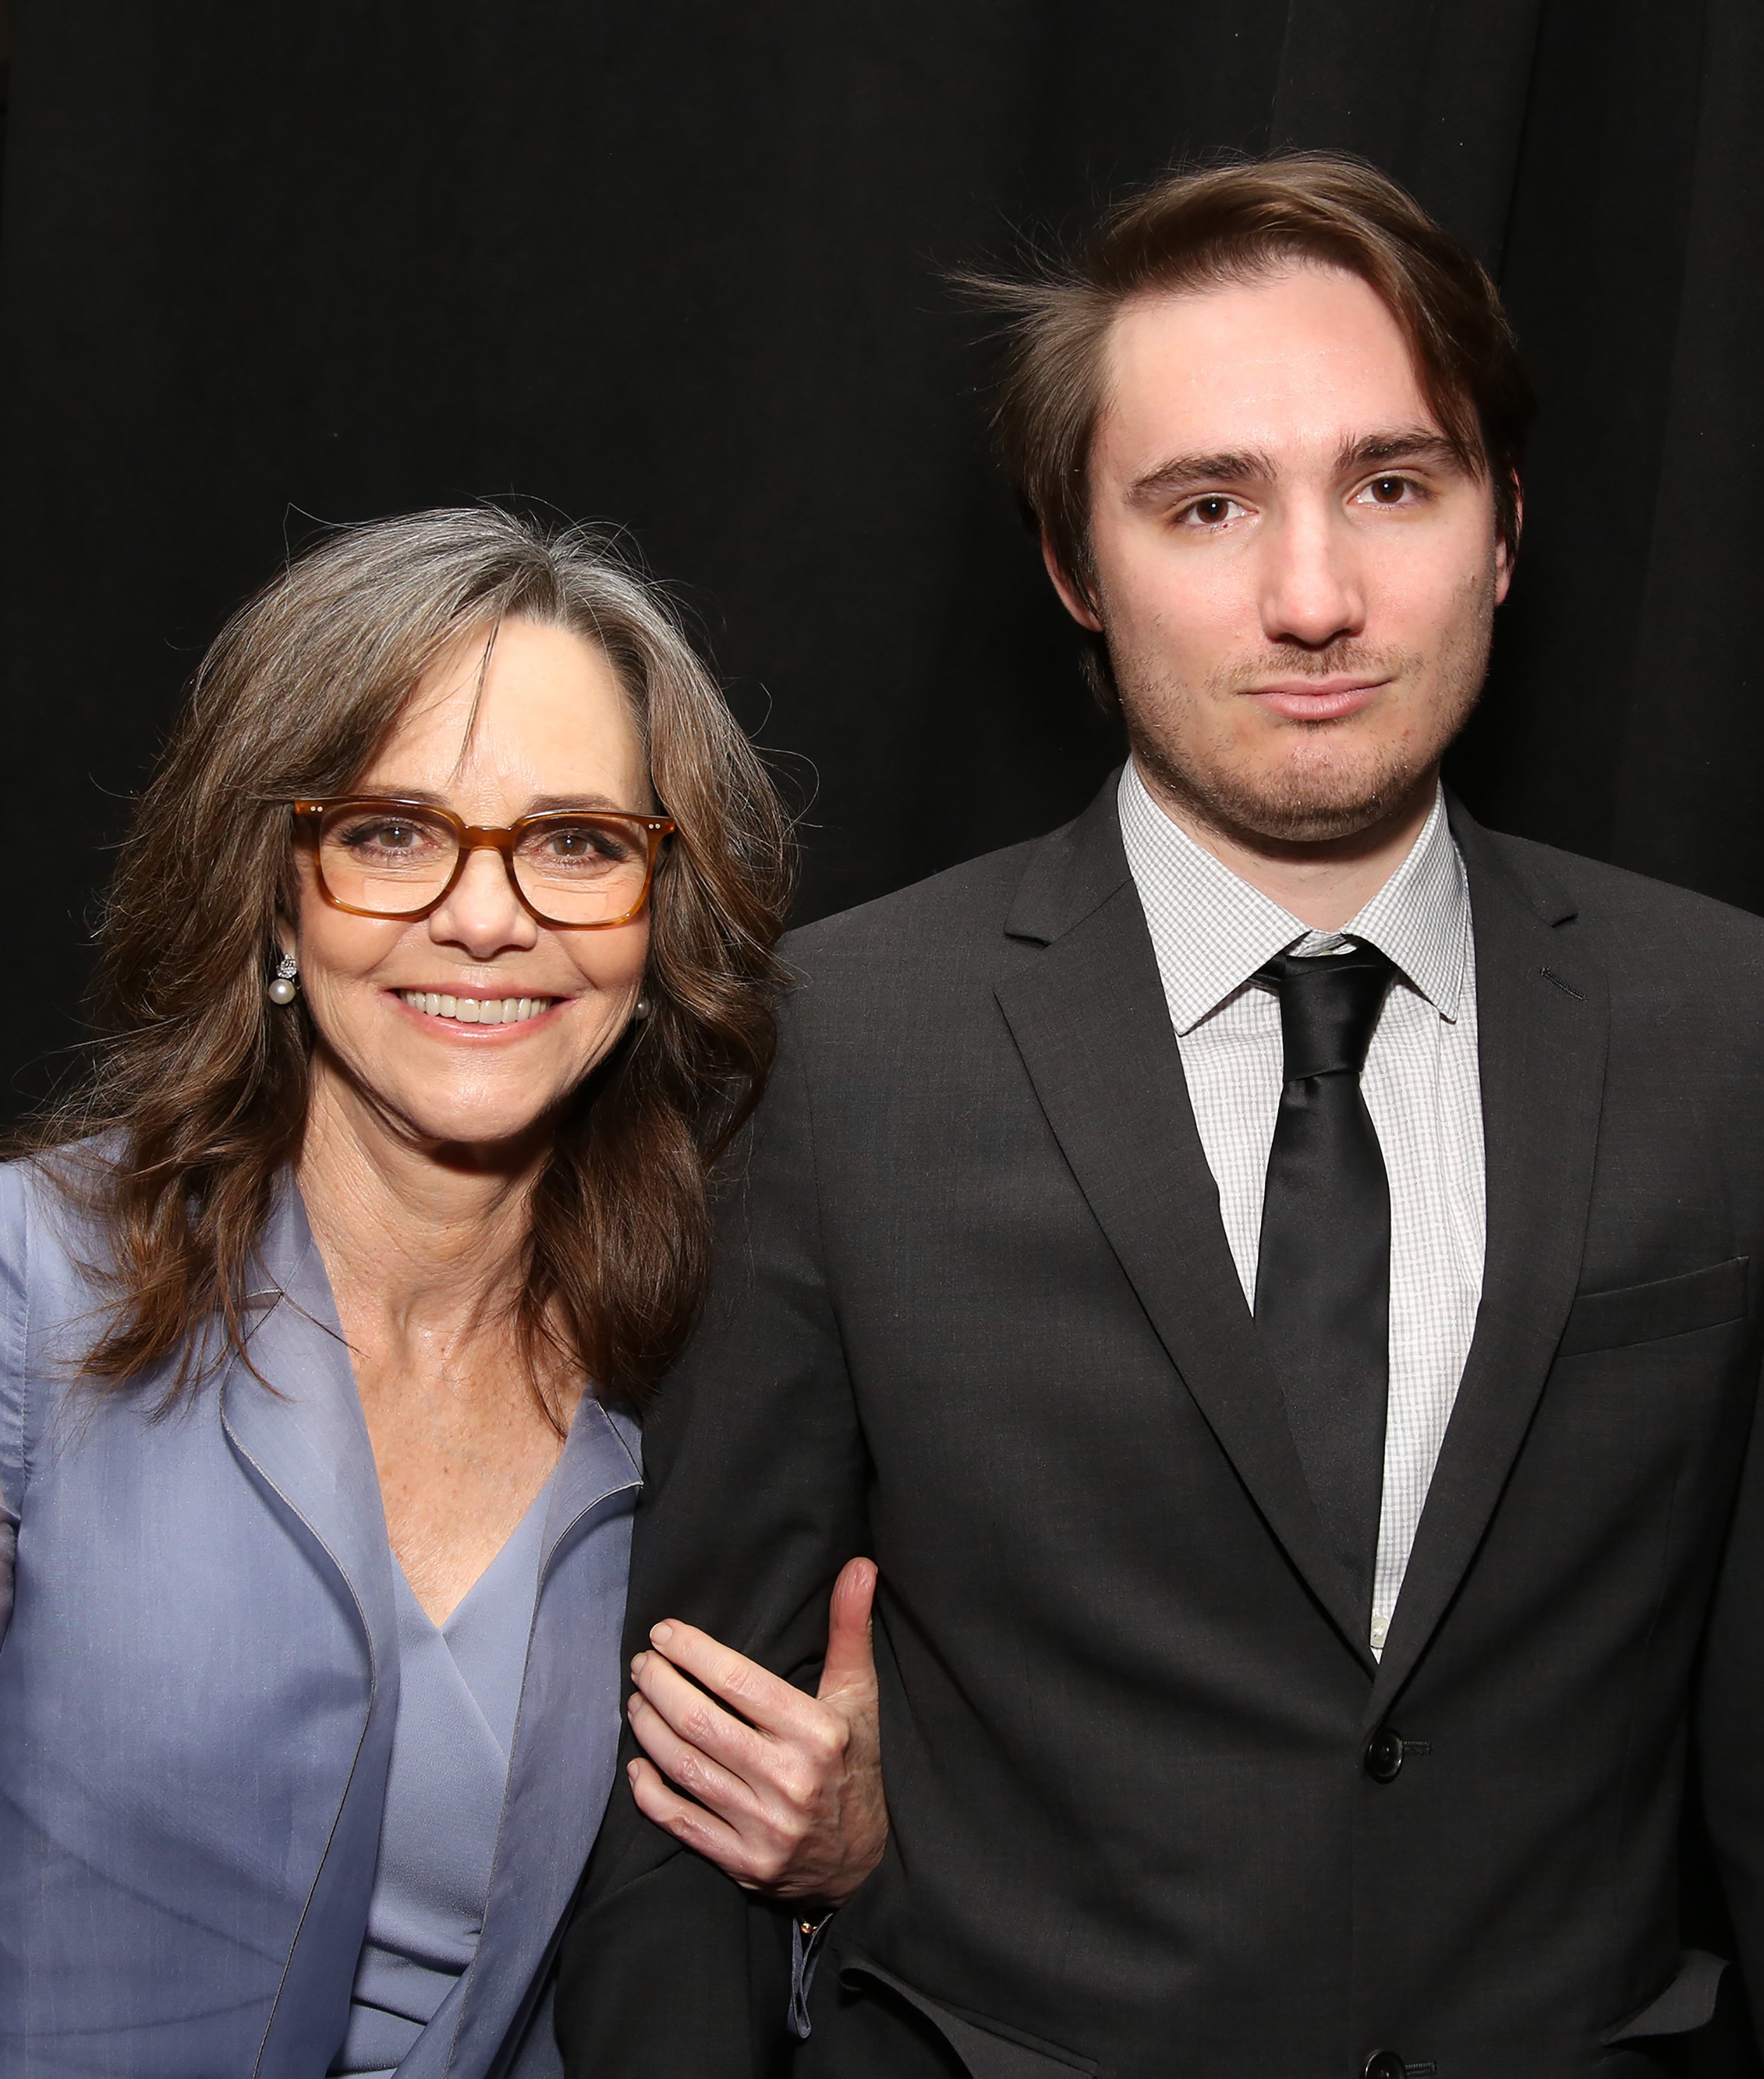     Sally Field and her son Samuel Greisman attend the Actors Fund Annual Gala at the Marriott Marquis on 05/08/2017 in New York City.  |  Source: Getty Images